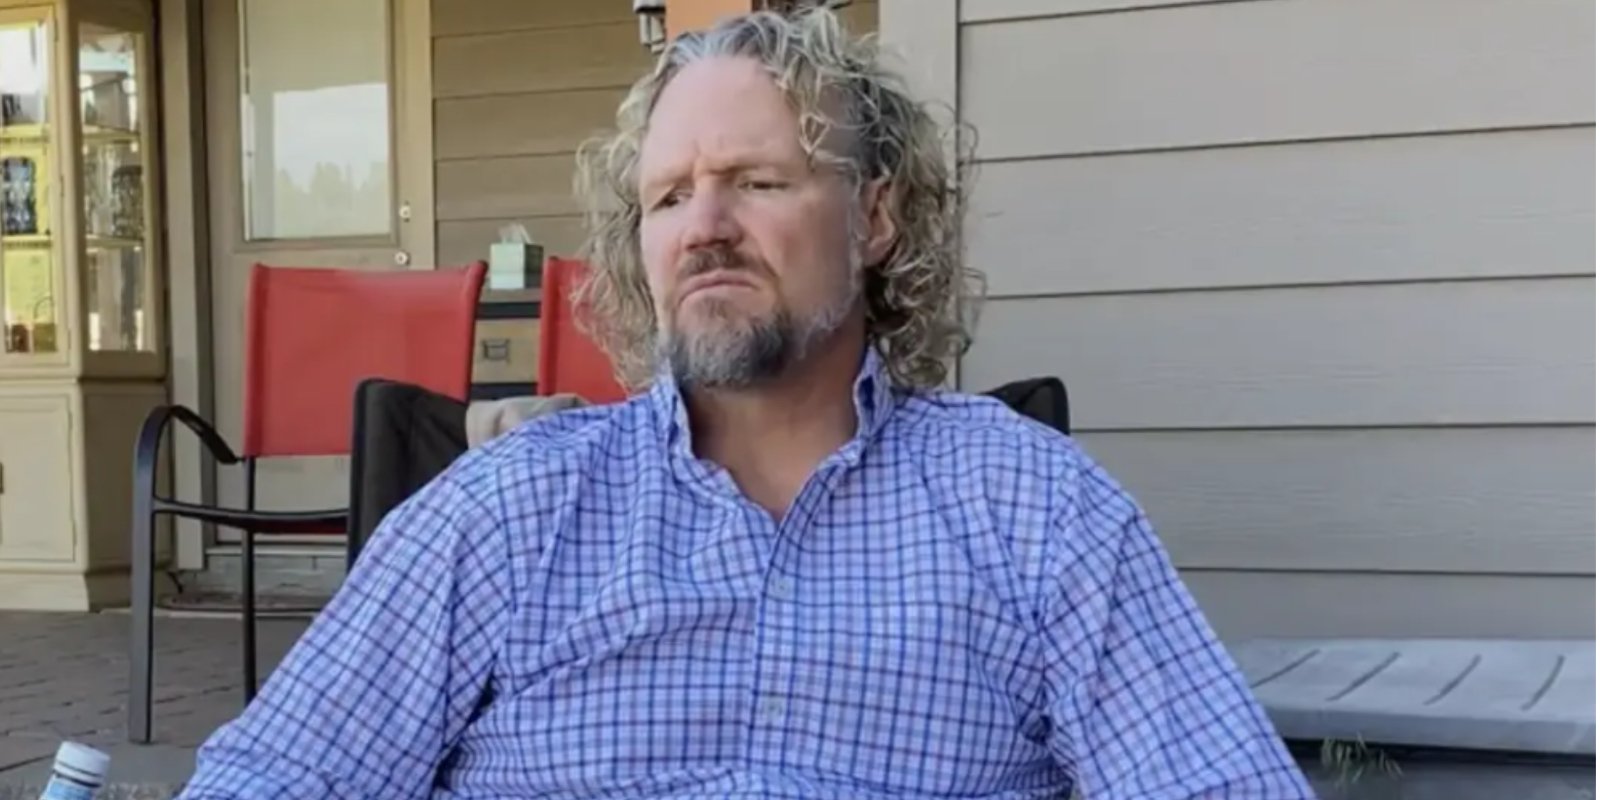 Kody Brown speaks to his wives during episode four of 'Sister Wives' season 17.